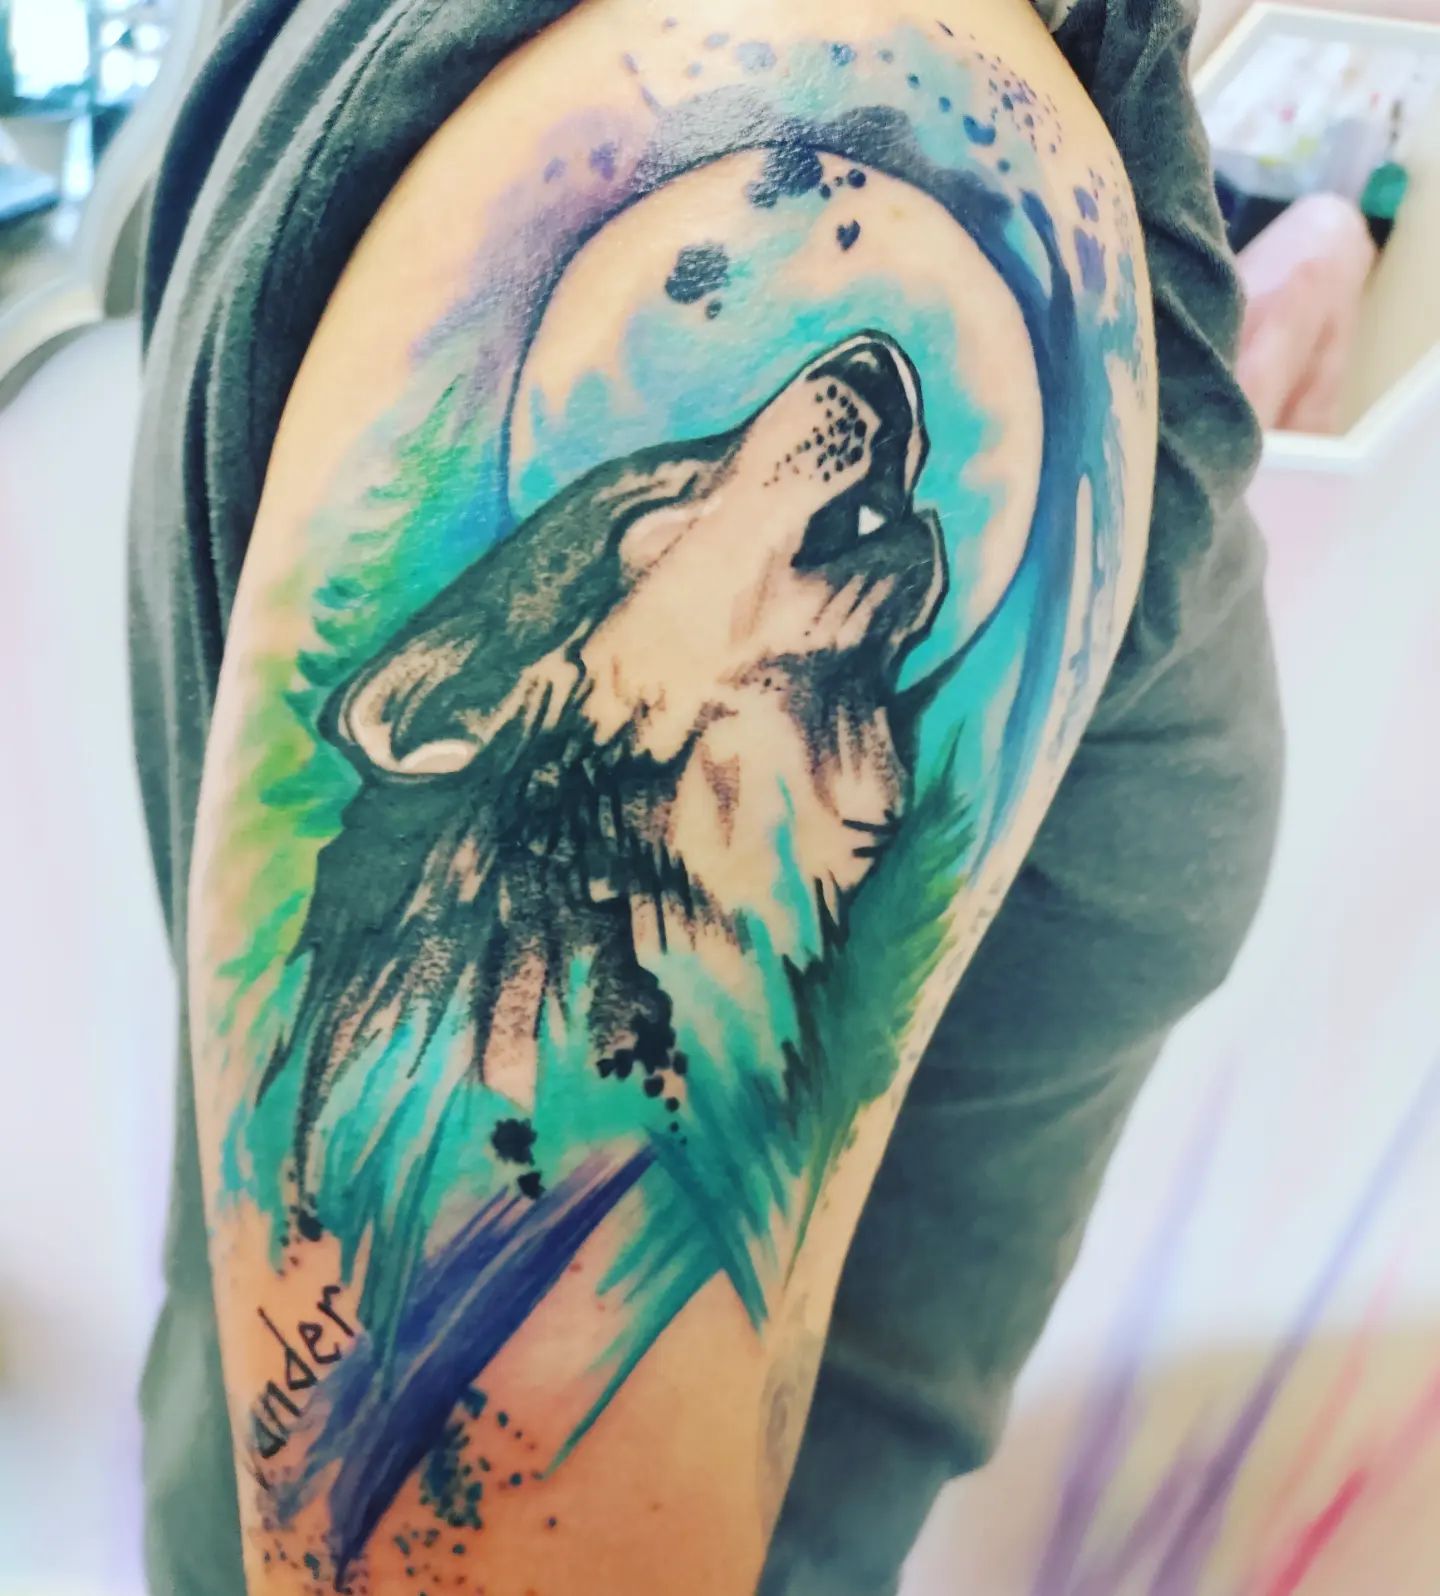 Not only a blackwork tattoo, but also a colorful wolf tattoo can be nice on your arm. This design confirms that statement.